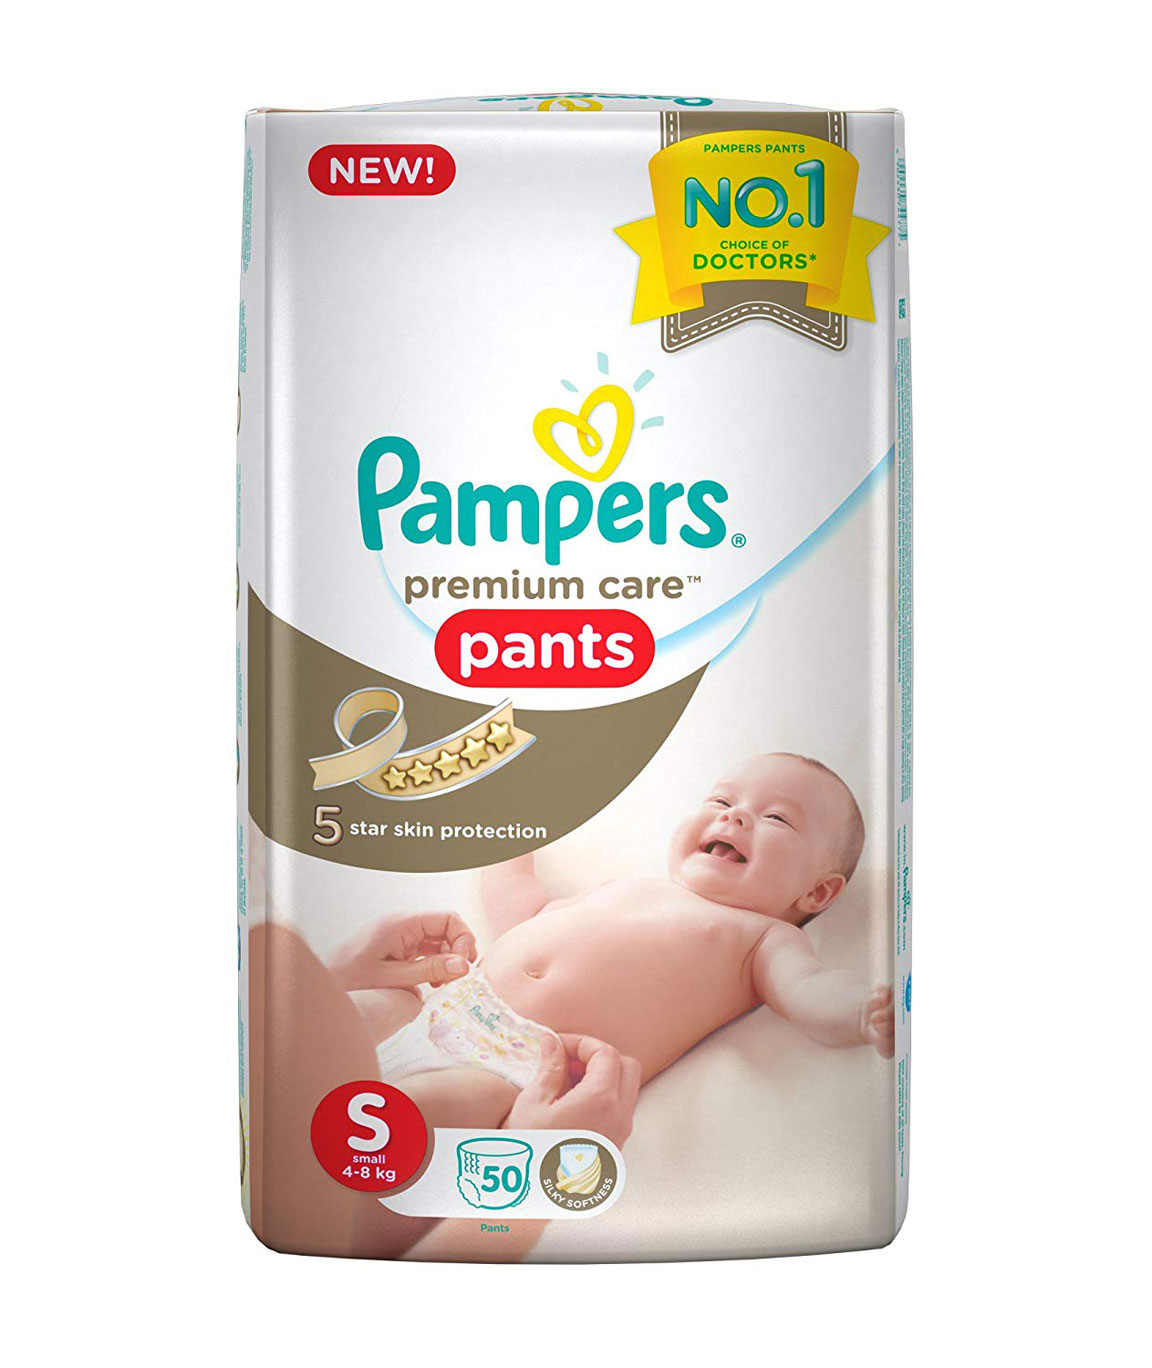 Diapers | Pampers Premium Care Pants For New Born Baby | Freeup